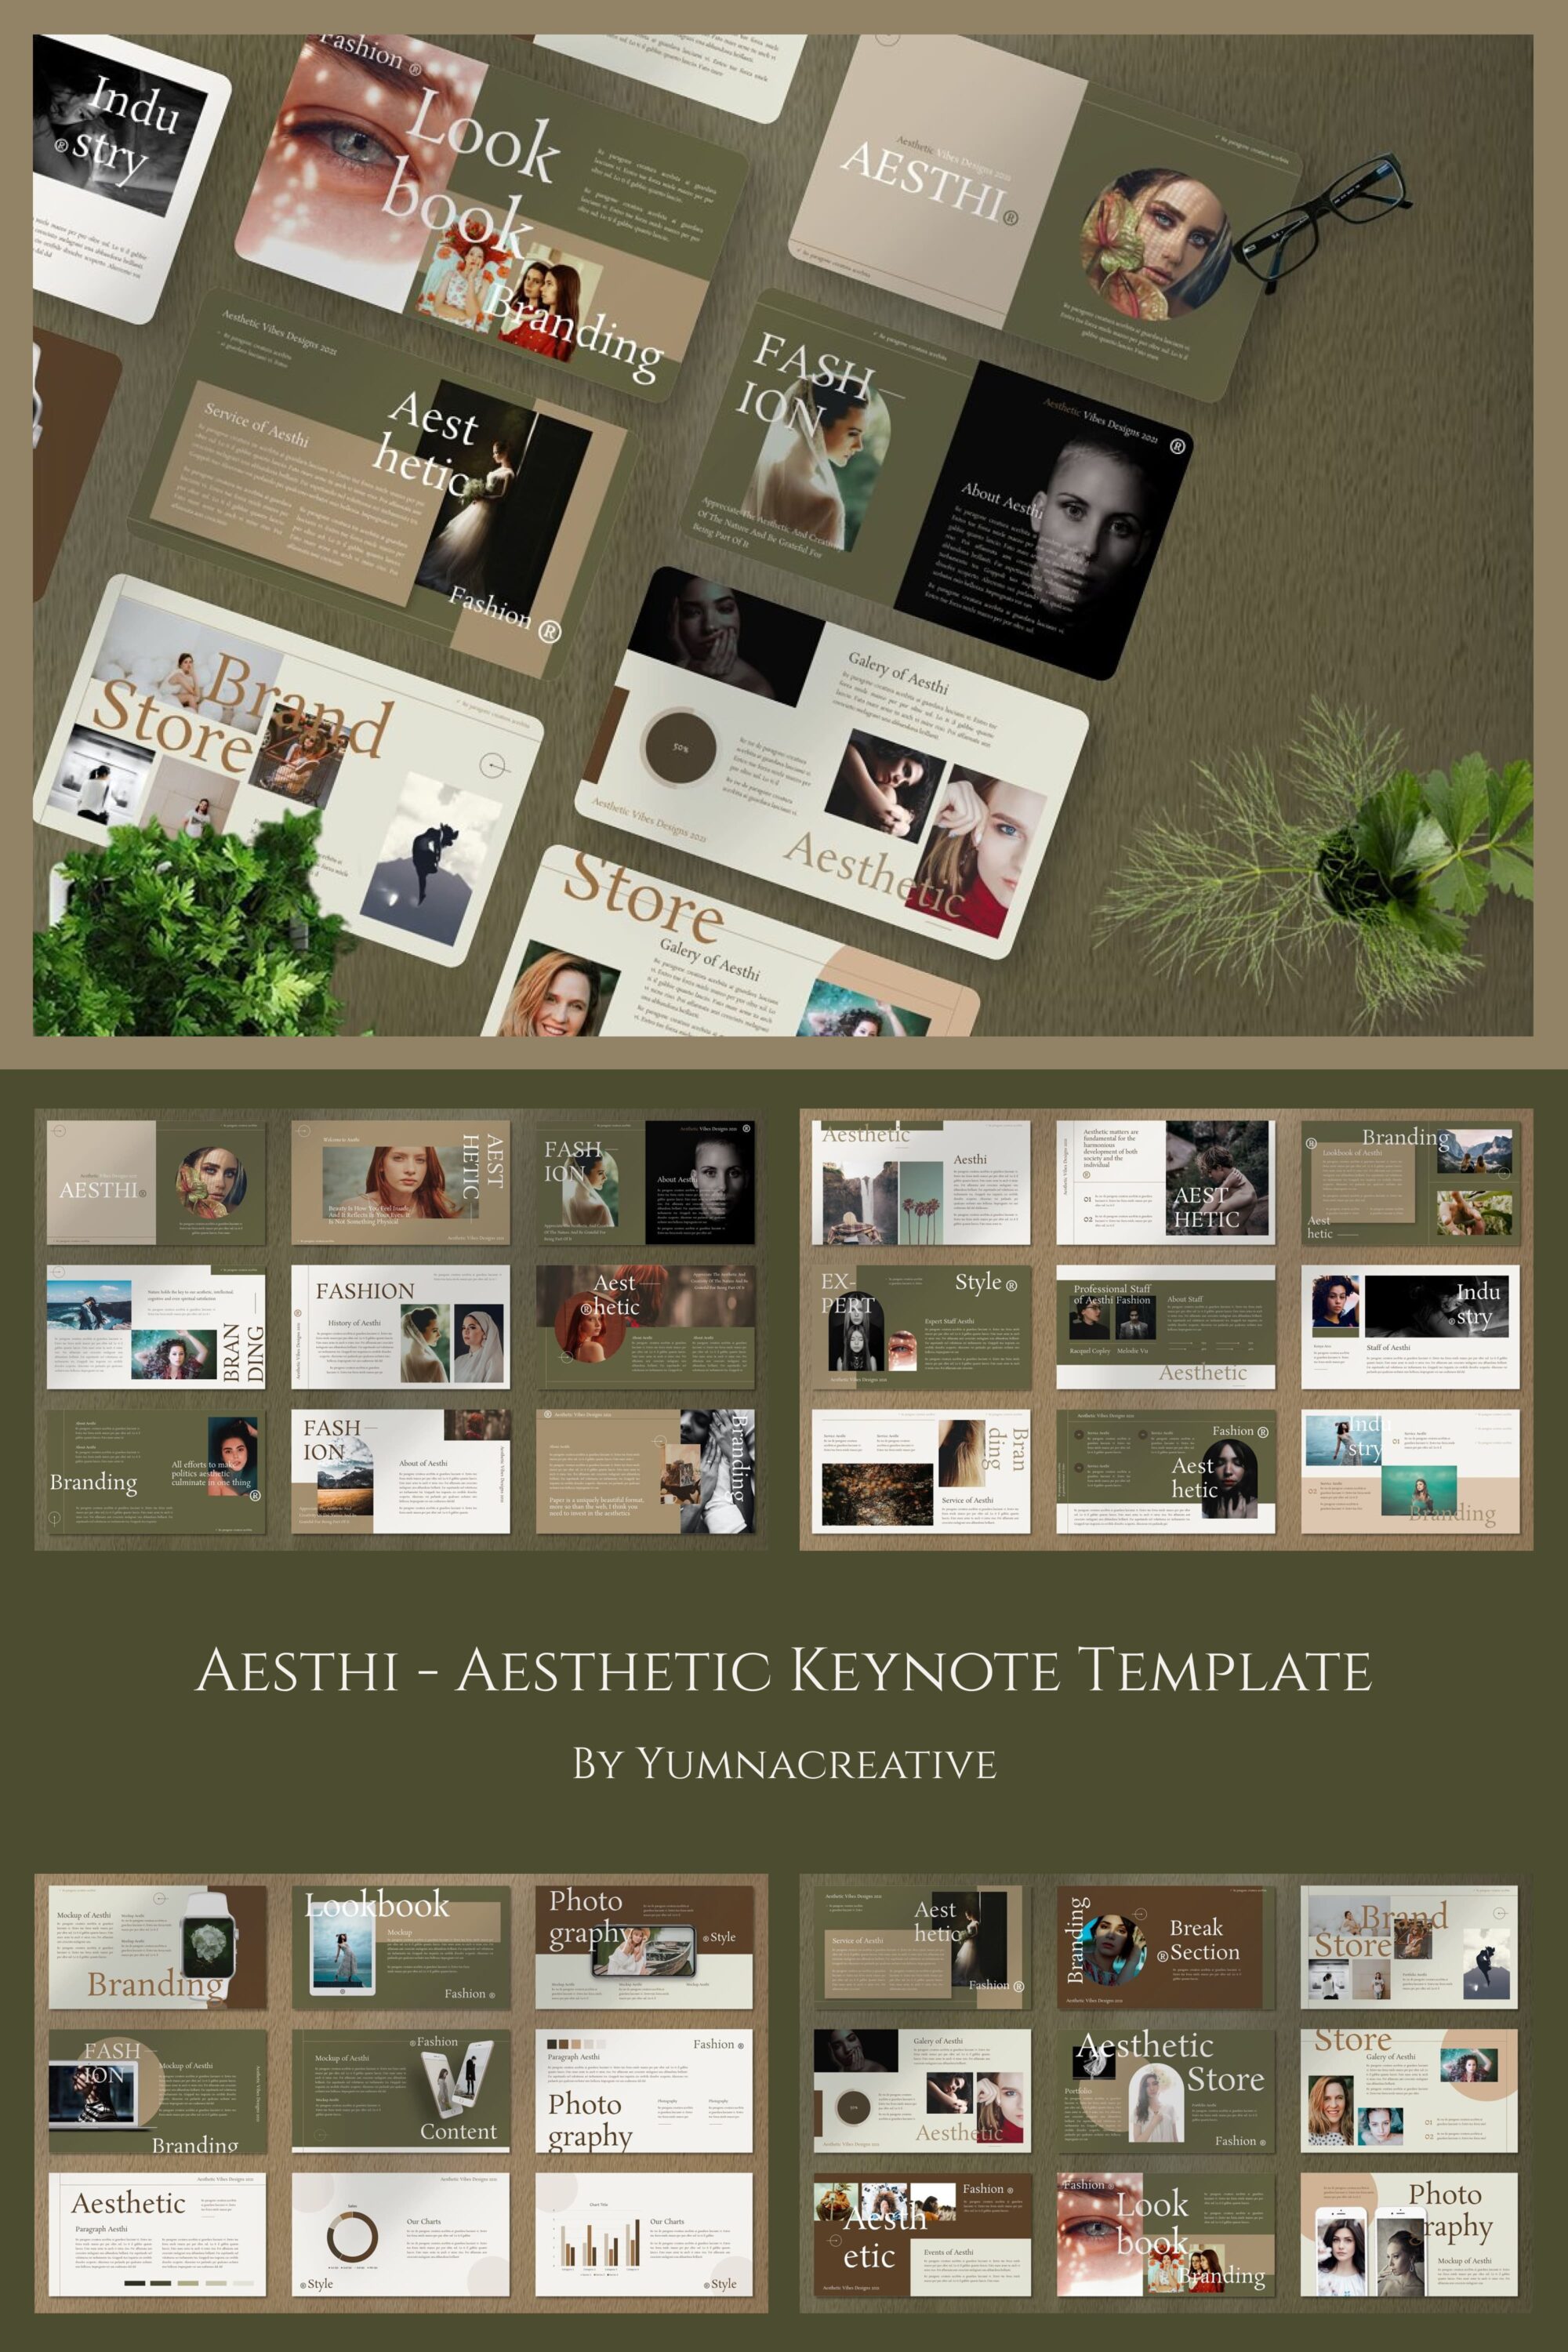 Aesthi Aesthetic Keynote Template - pinterest image preview.